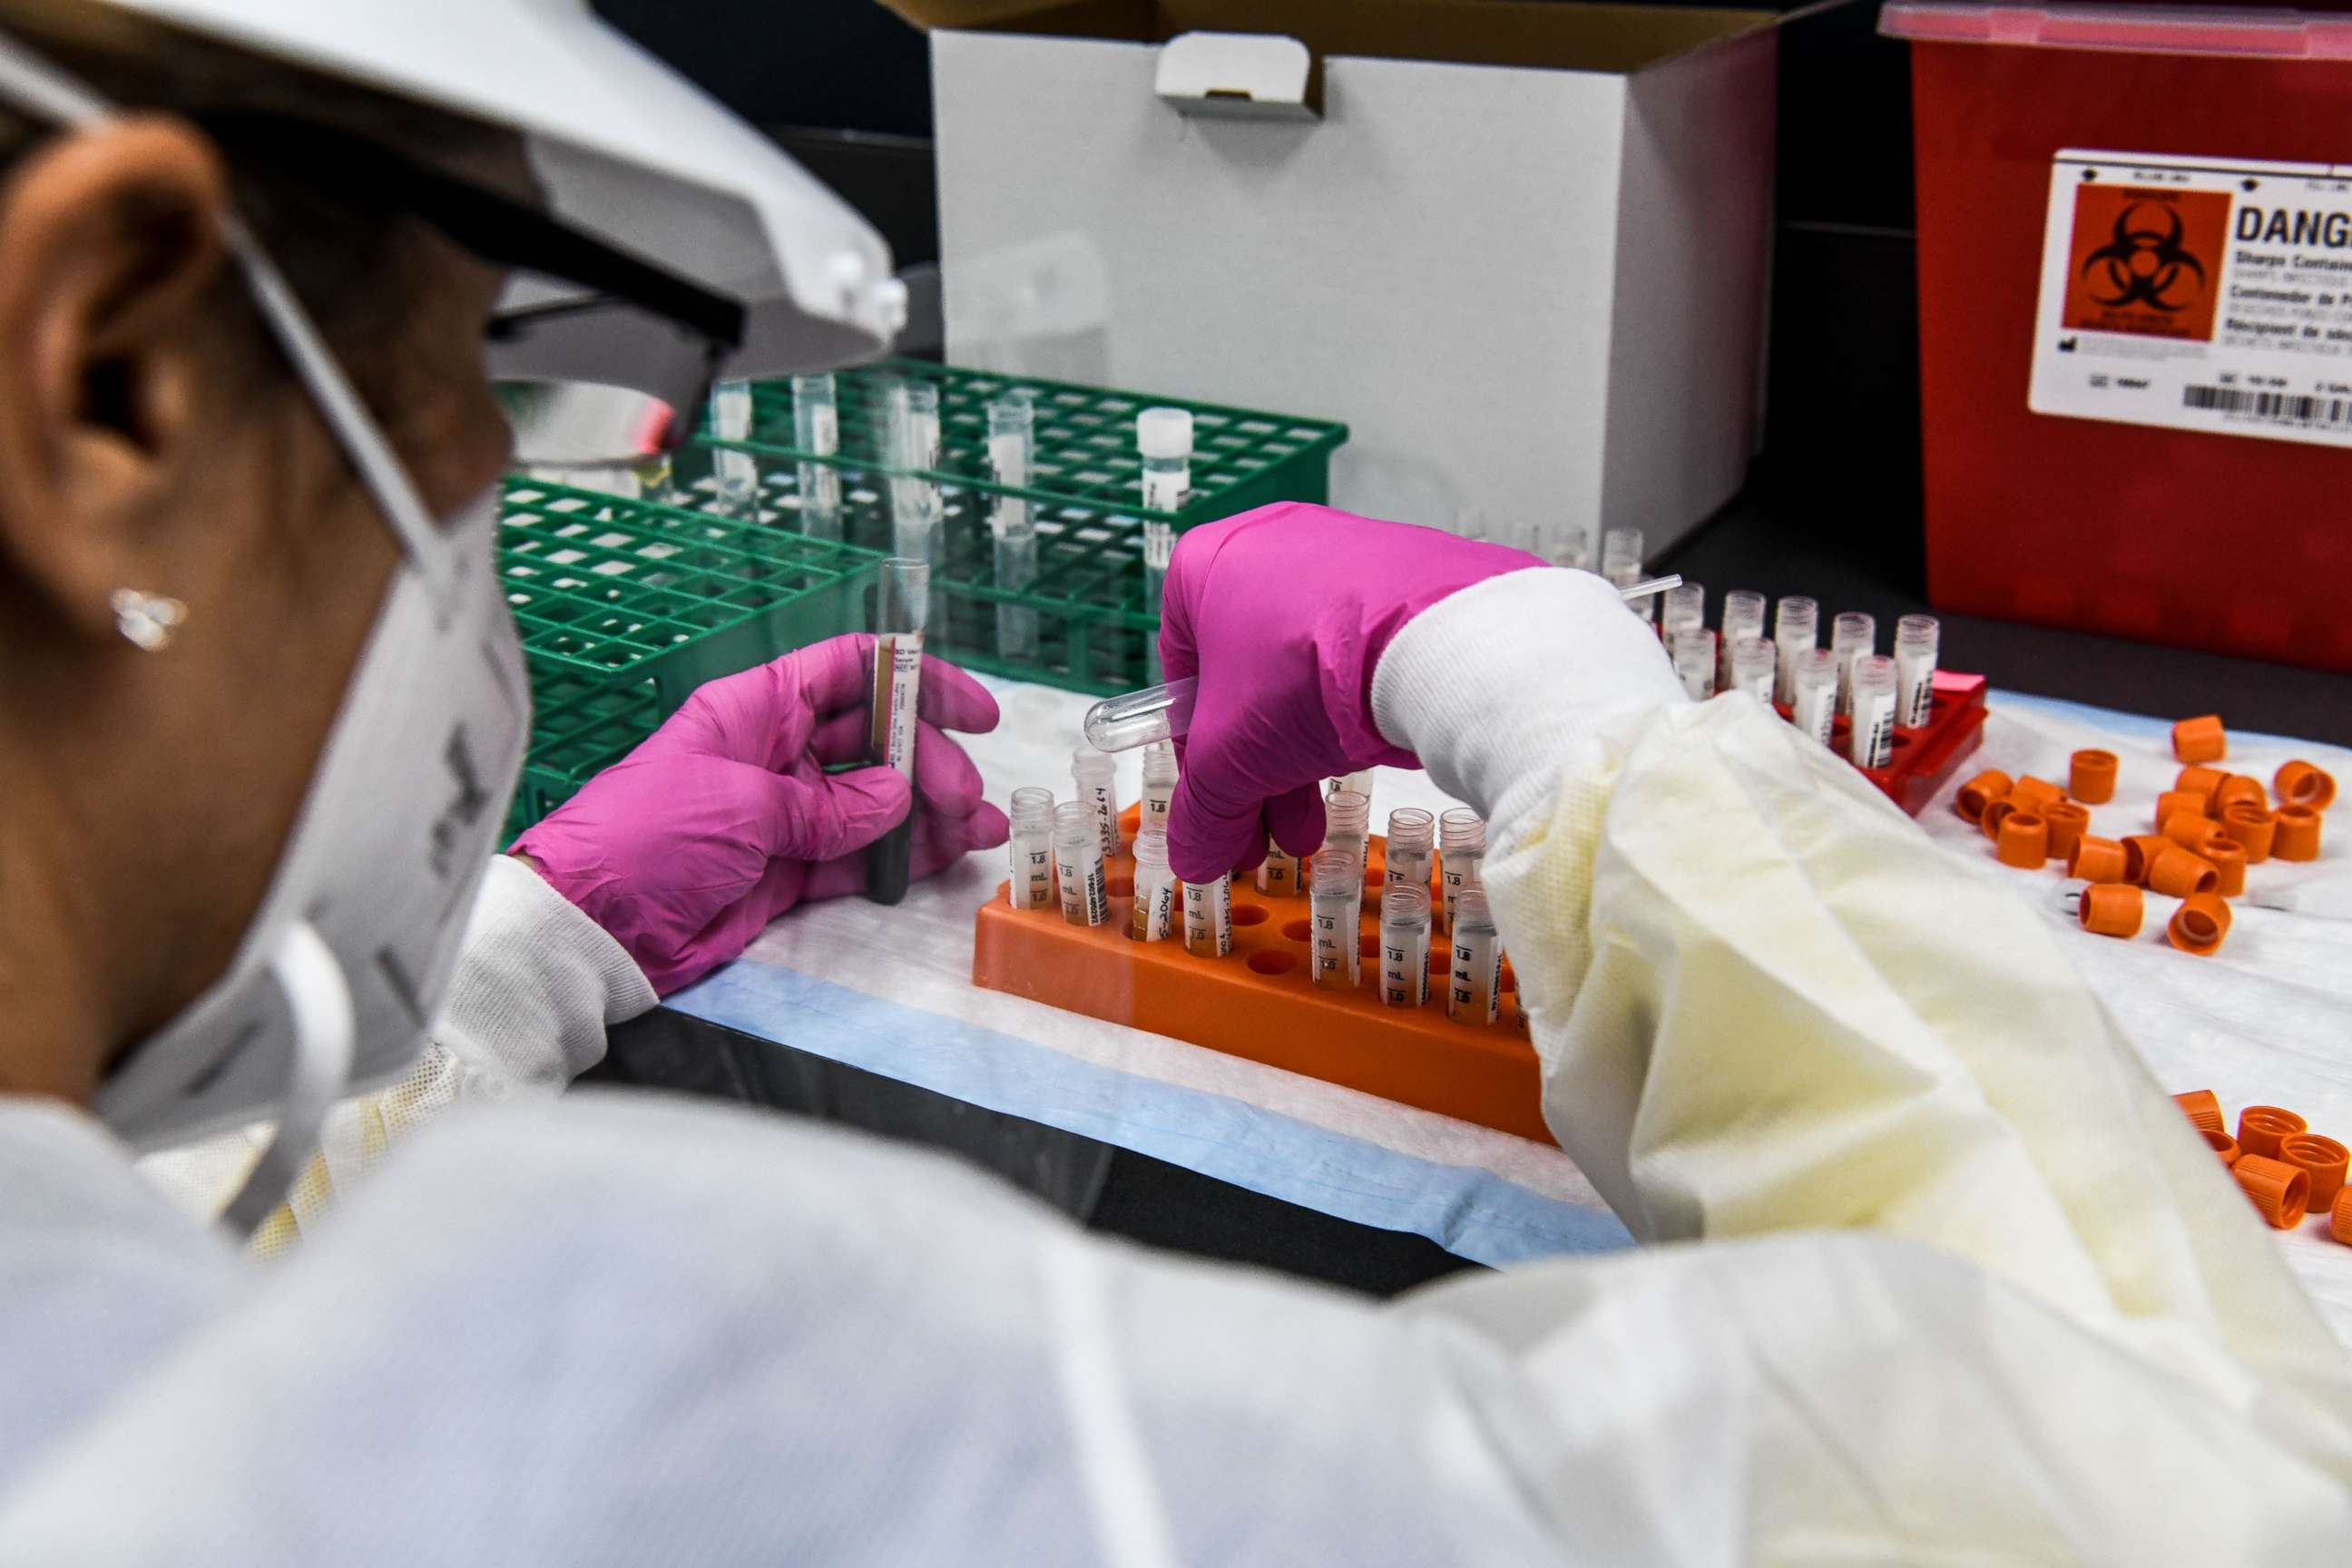 PHOTO: In this file photo taken on August 13, 2020, a lab technician sorts blood samples inside a lab for a Covid-19 vaccine study at the Research Centers of America (RCA) in Hollywood, Florida. 